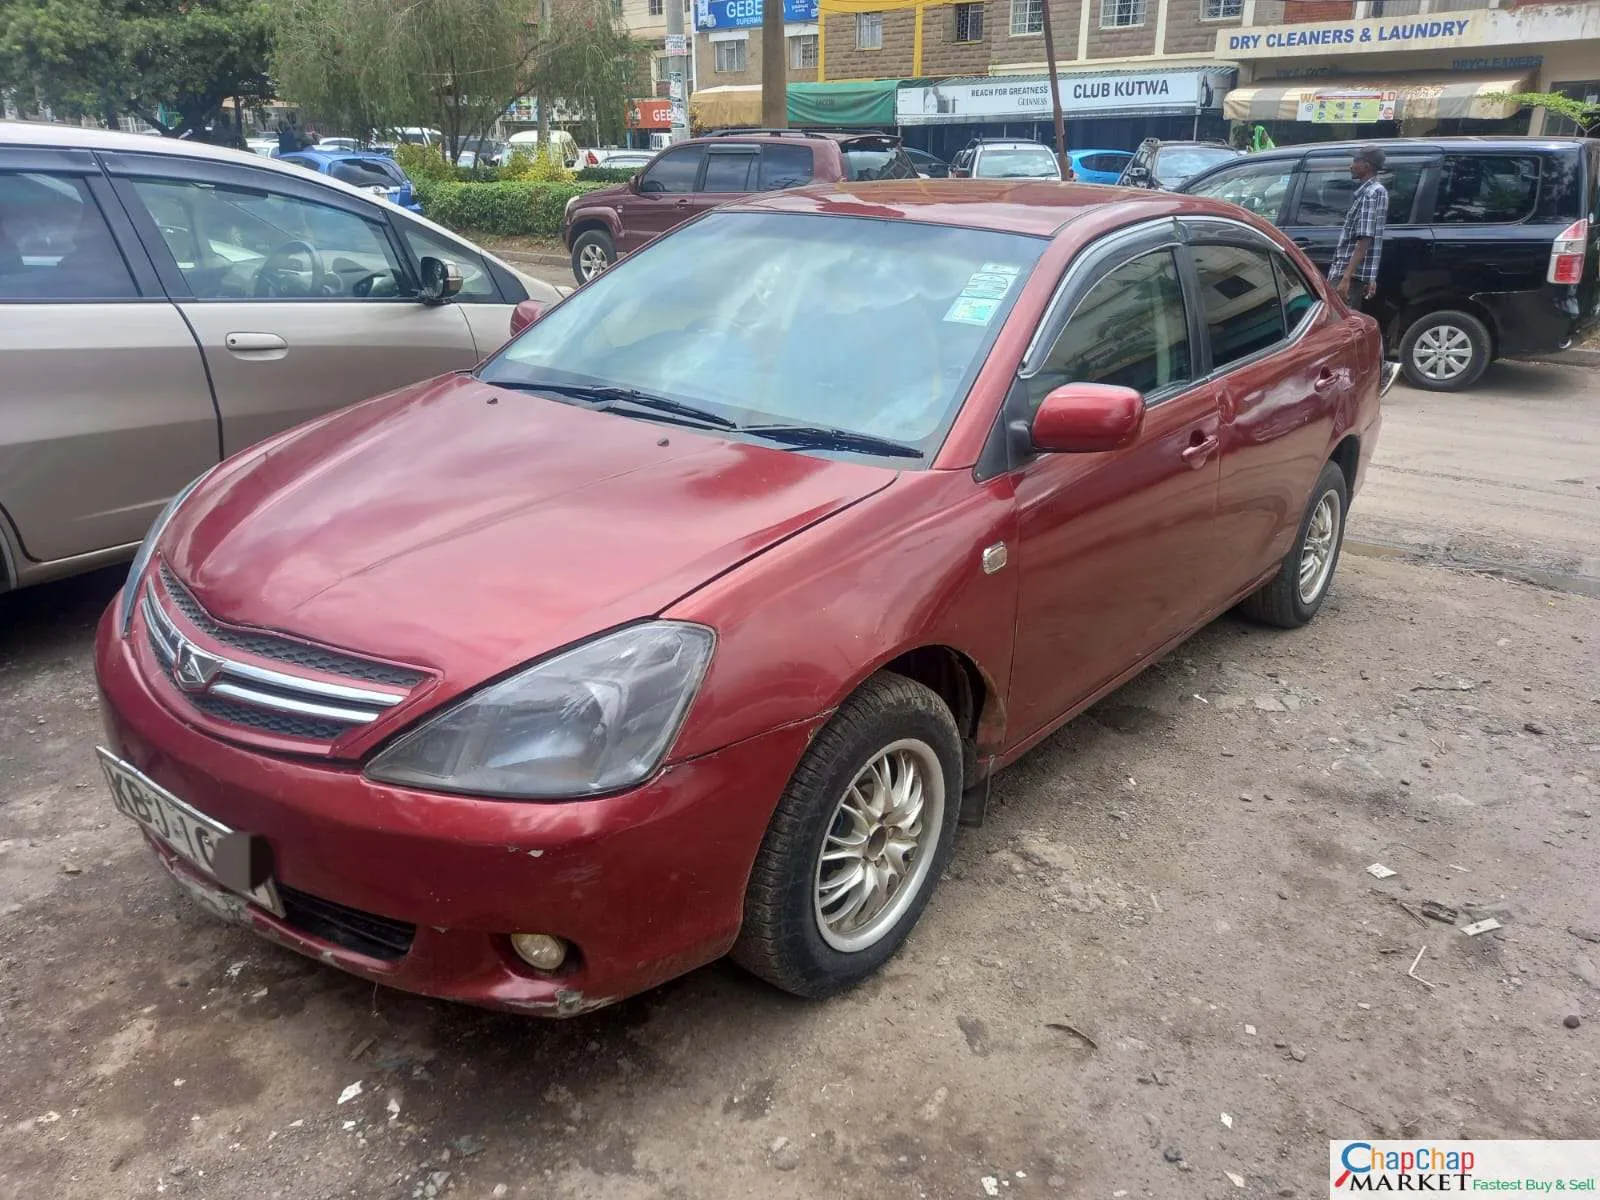 Cars Cars For Sale/Vehicles-Toyota Allion 2003 420k ONLY You Pay 30% Deposit 70% INSTALLMENTS Trade in OK 4